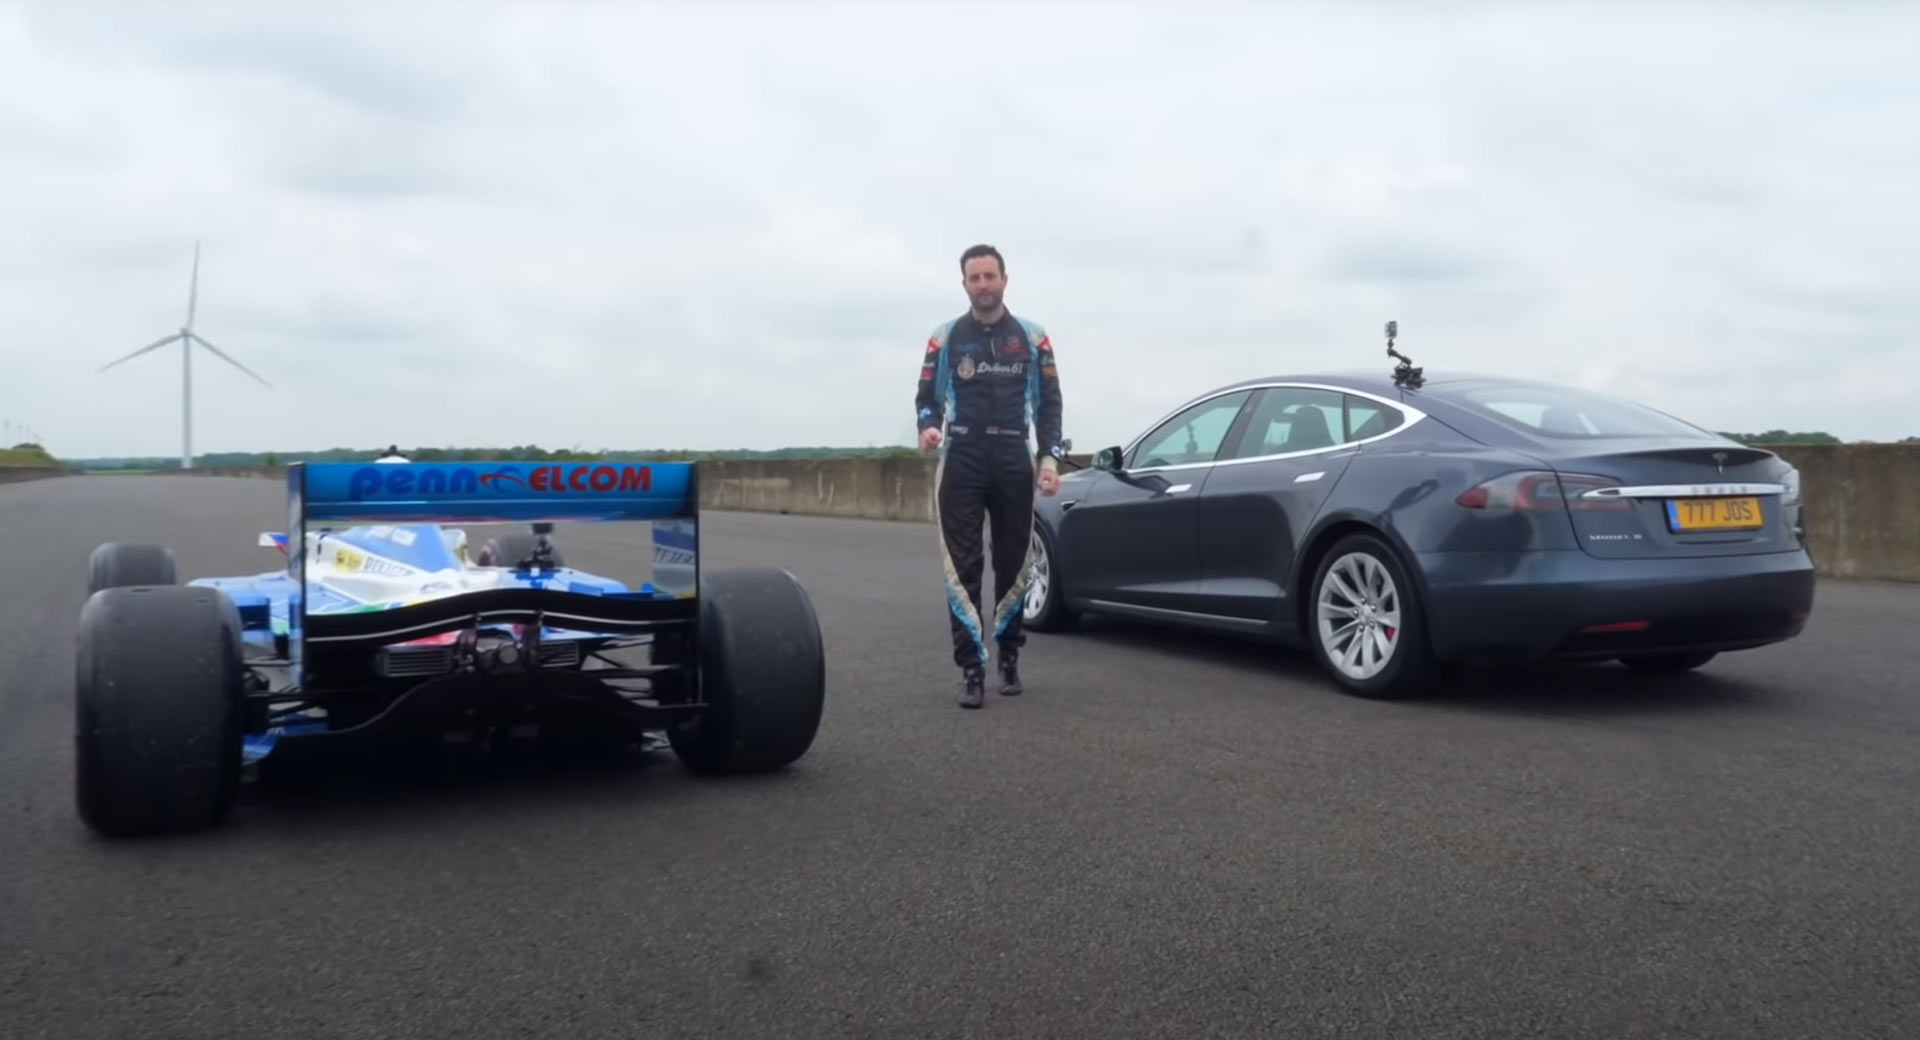 Bounty huwelijk output Can A Tesla Model S Out-Accelerate An Old V10-Powered F1 Car? | Carscoops